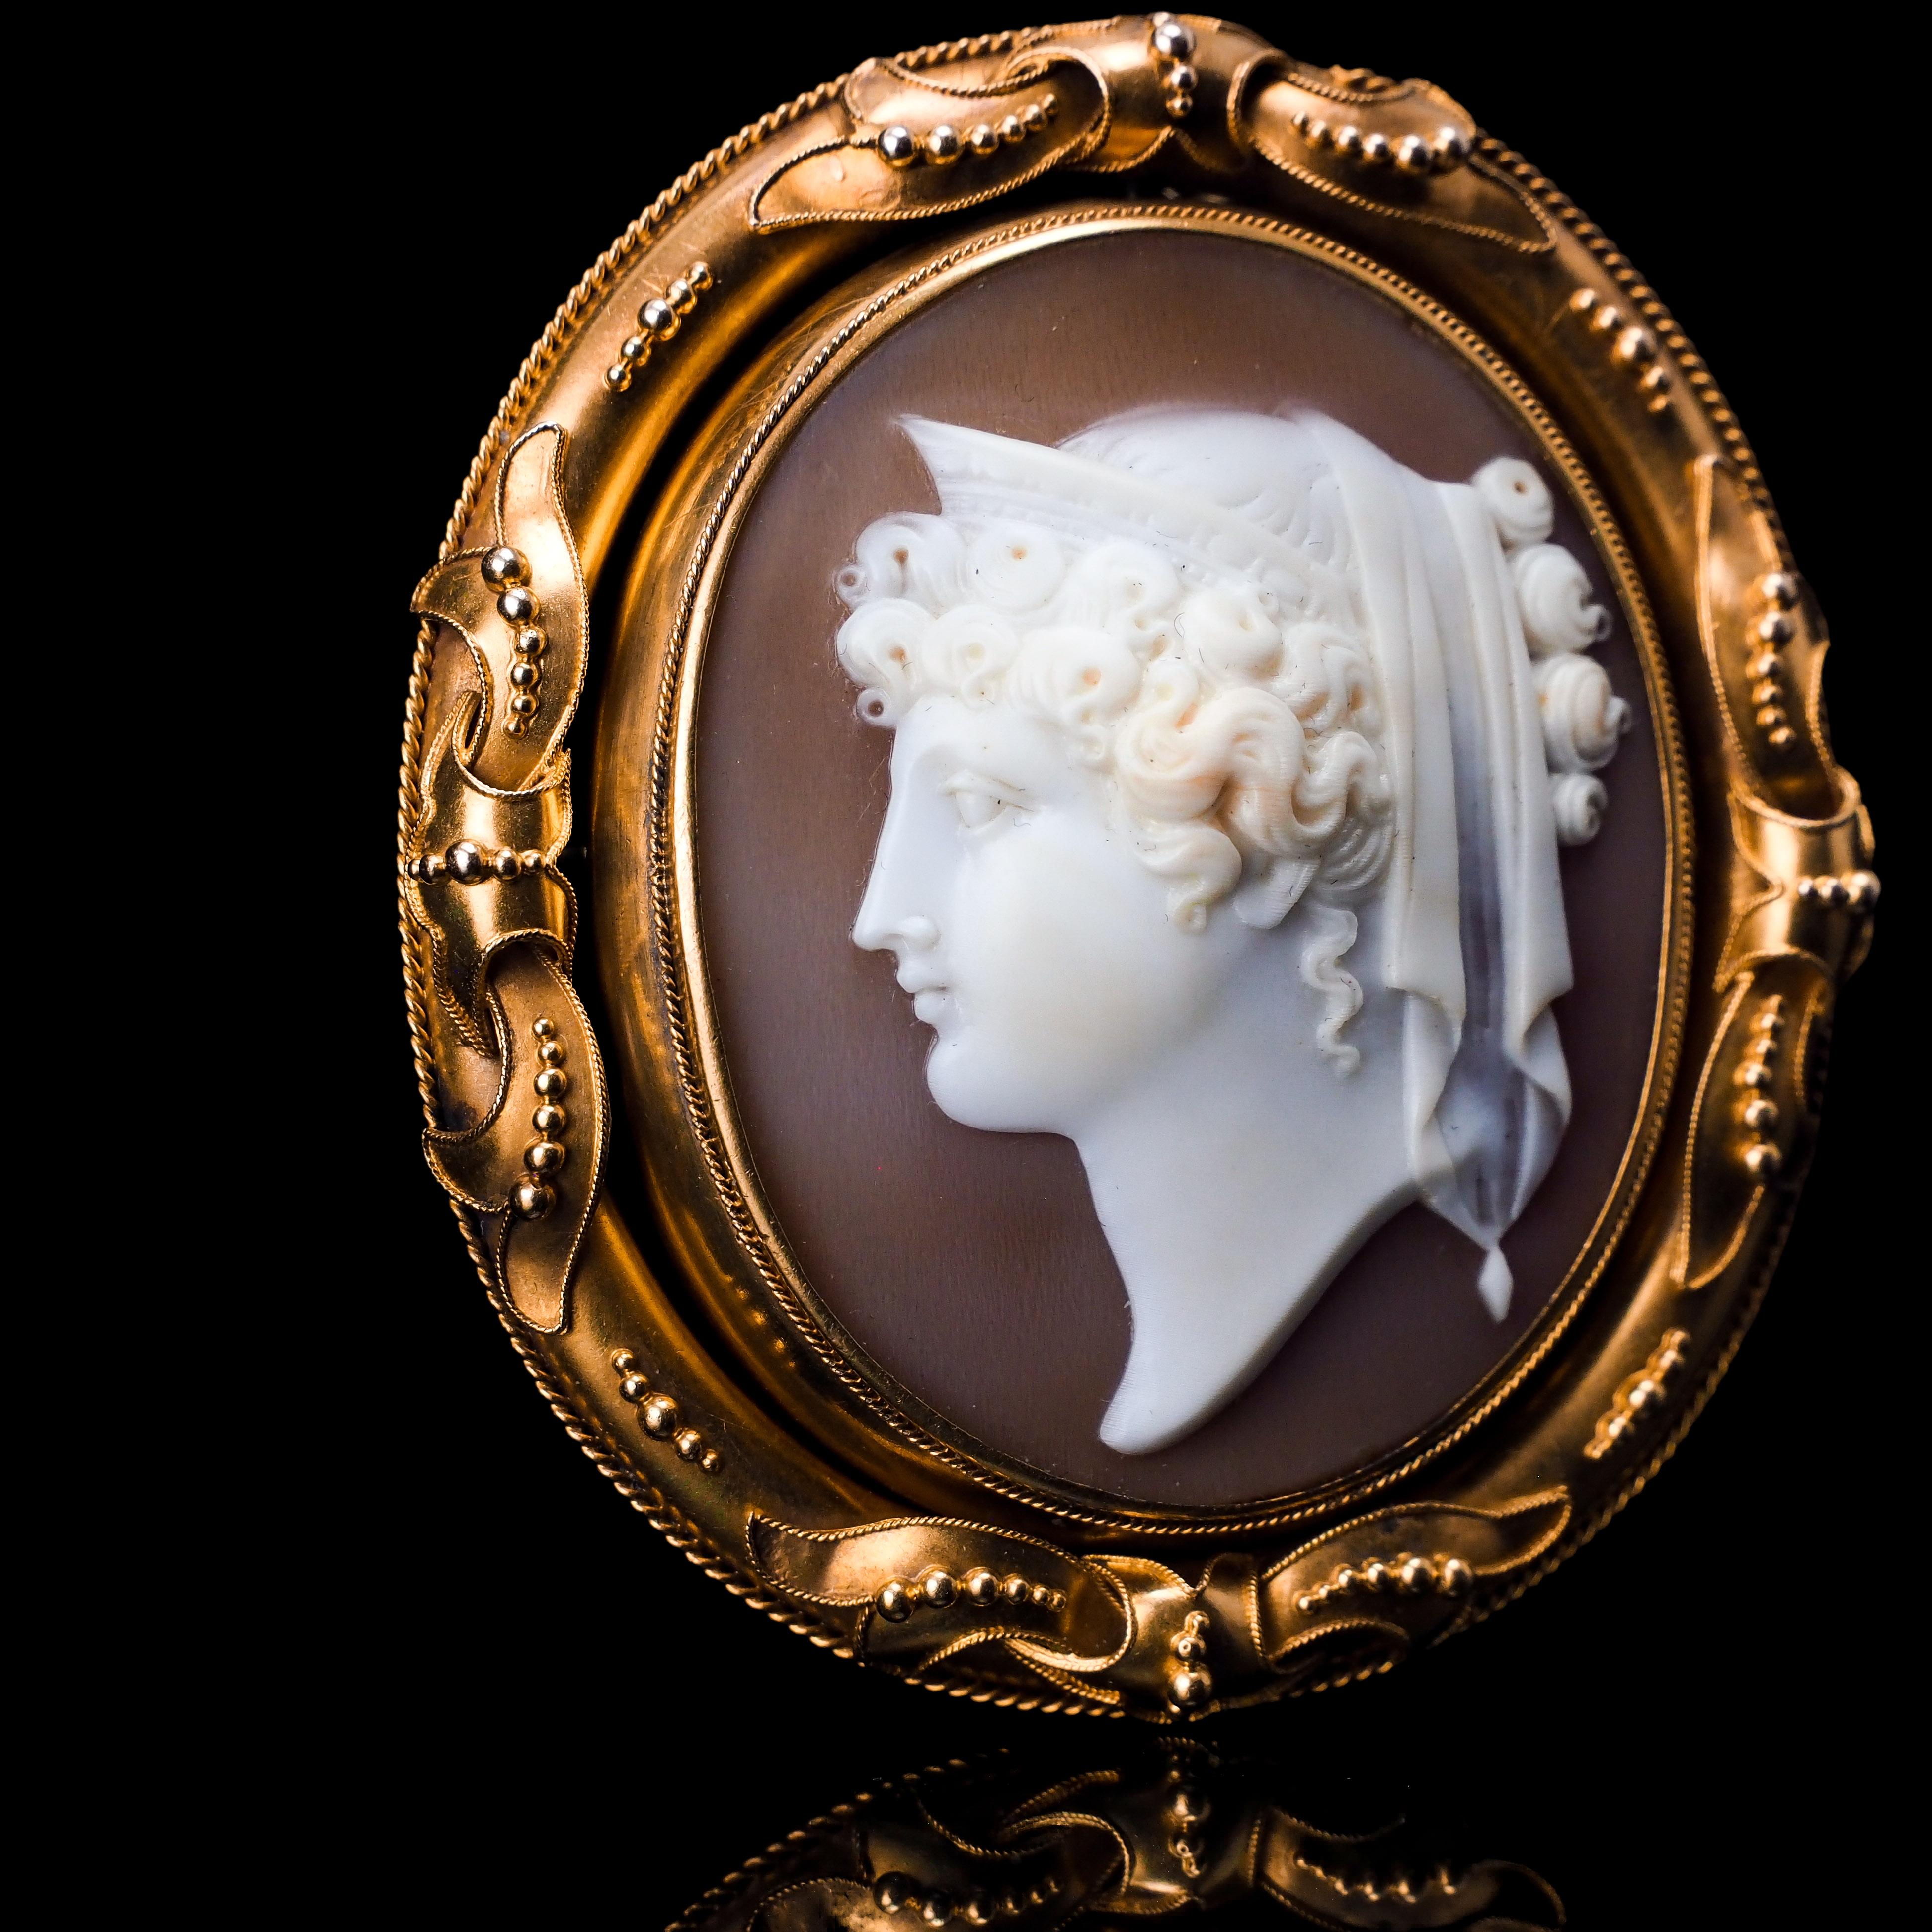 Antique Cameo Brooch Pendant Necklace 18K Gold - Victorian c.1860 For Sale 13